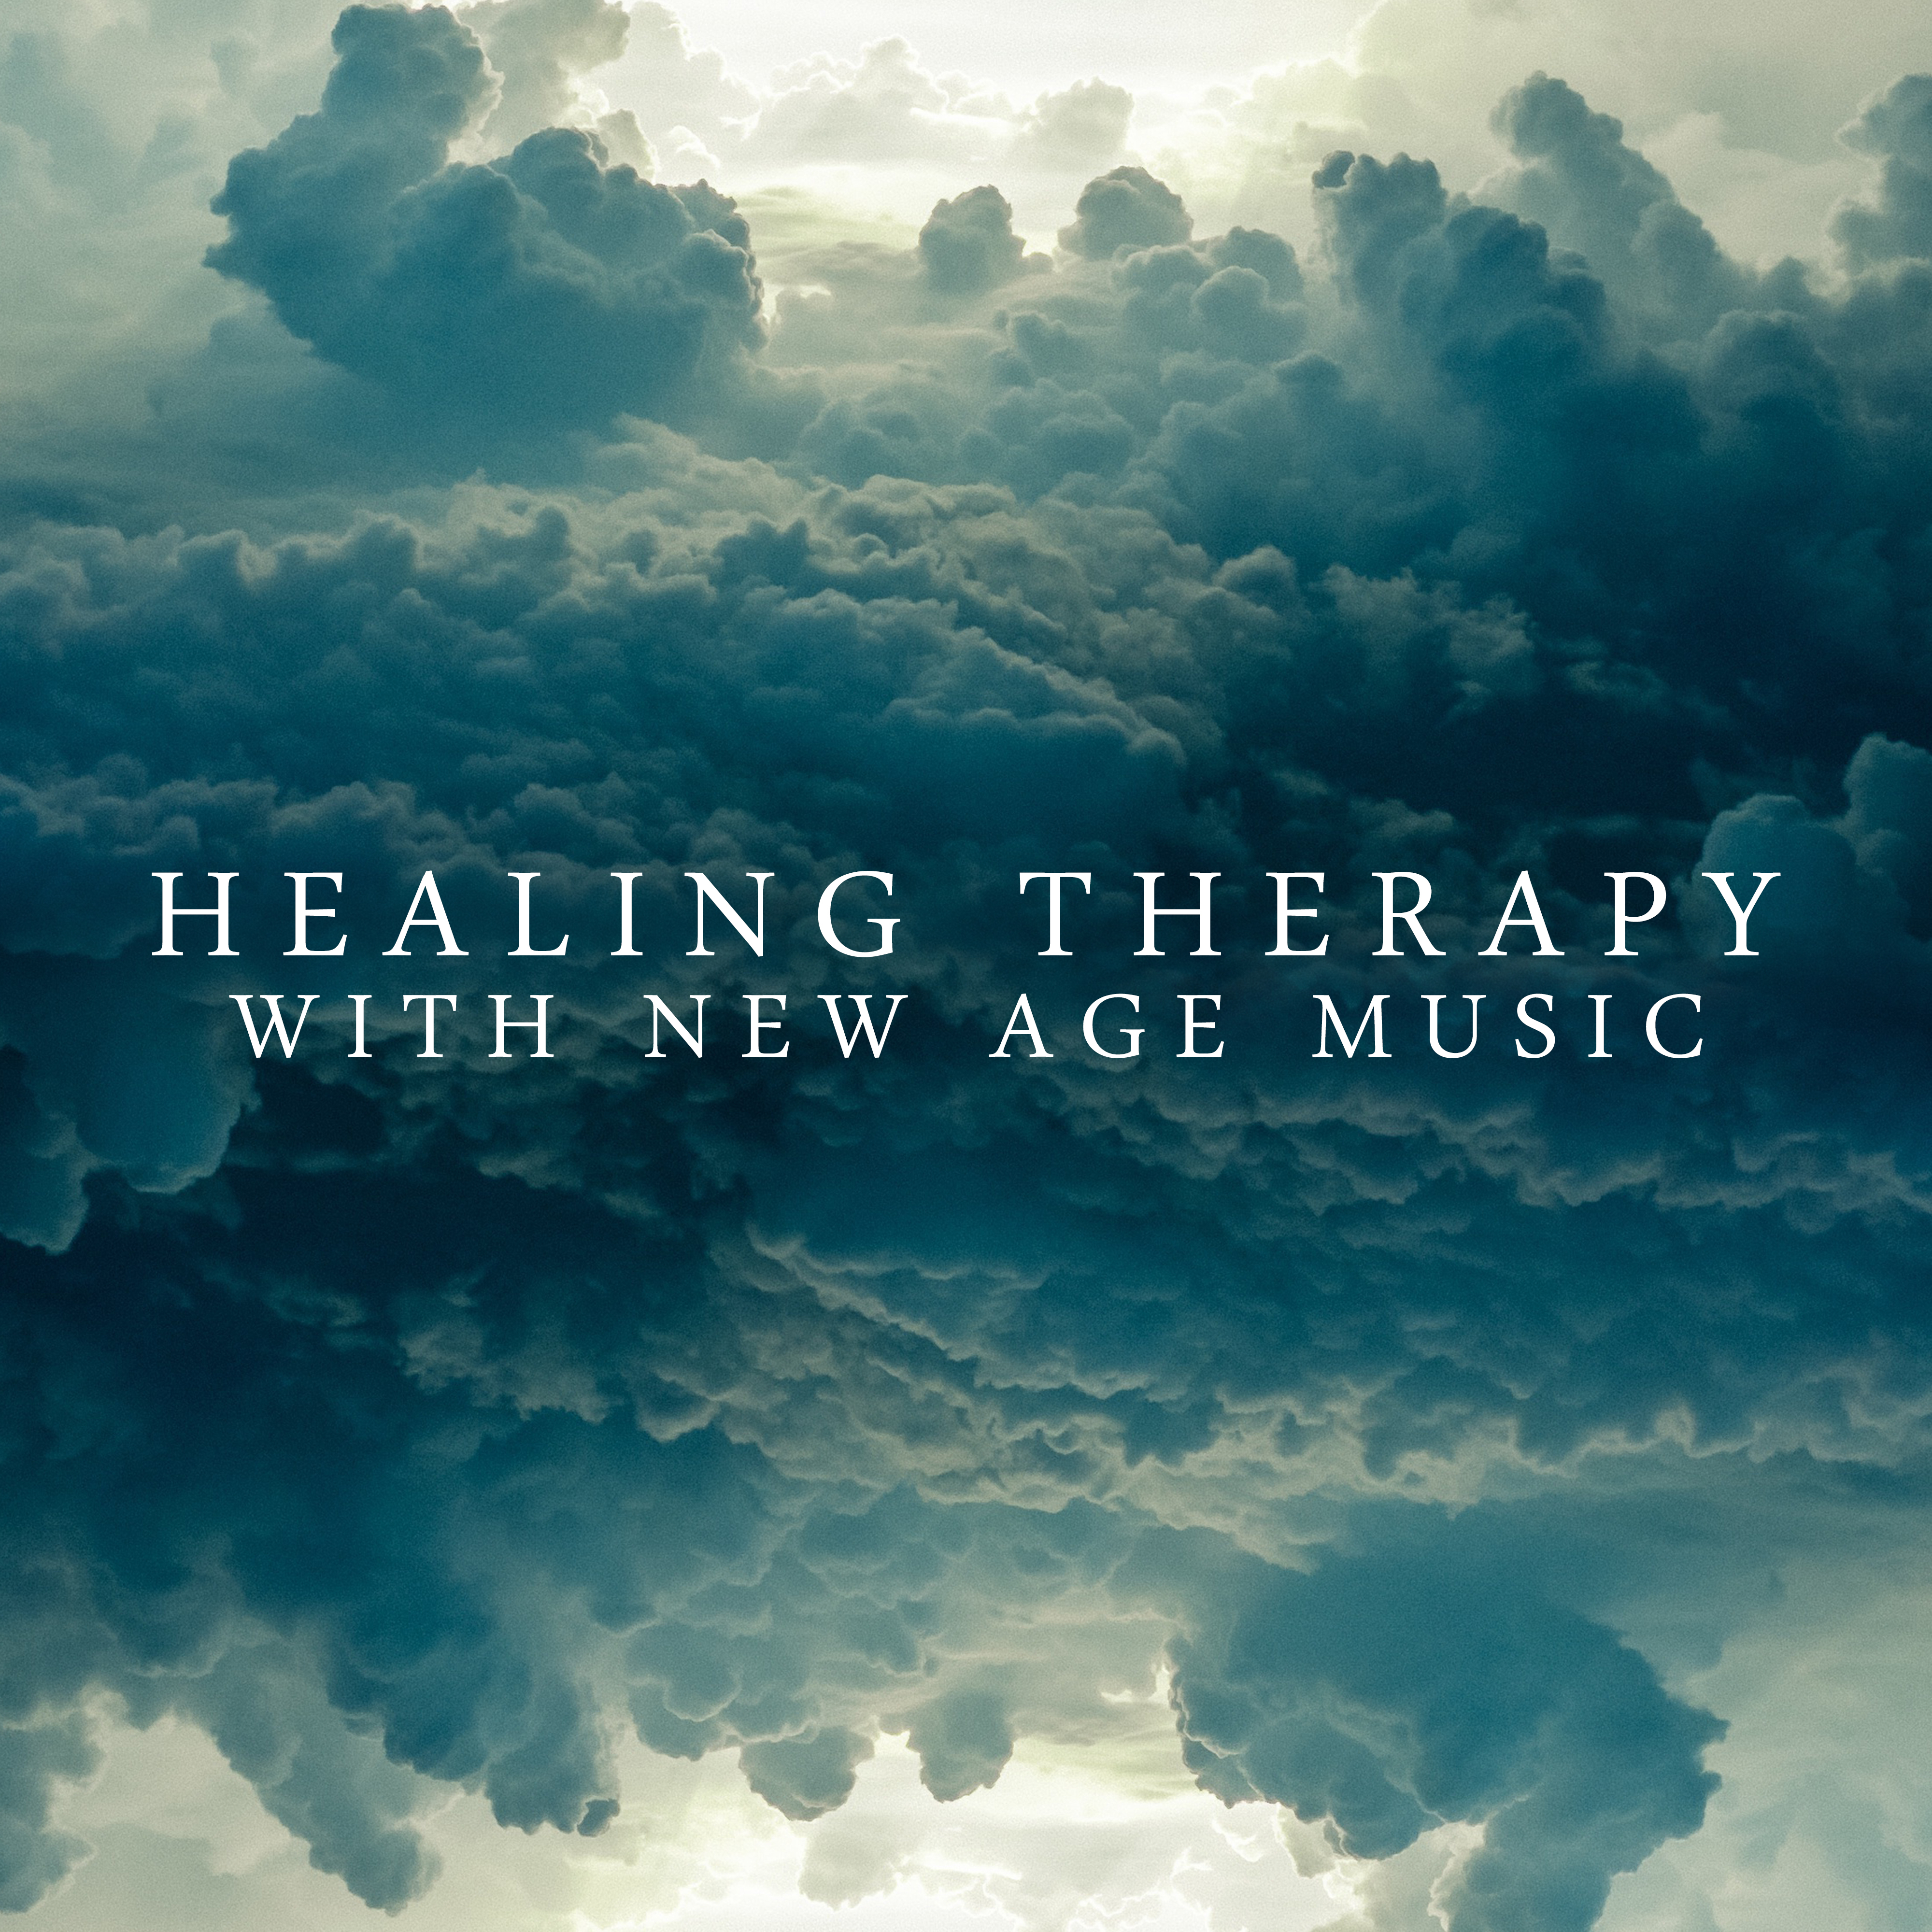 Healing Therapy with New Age Music